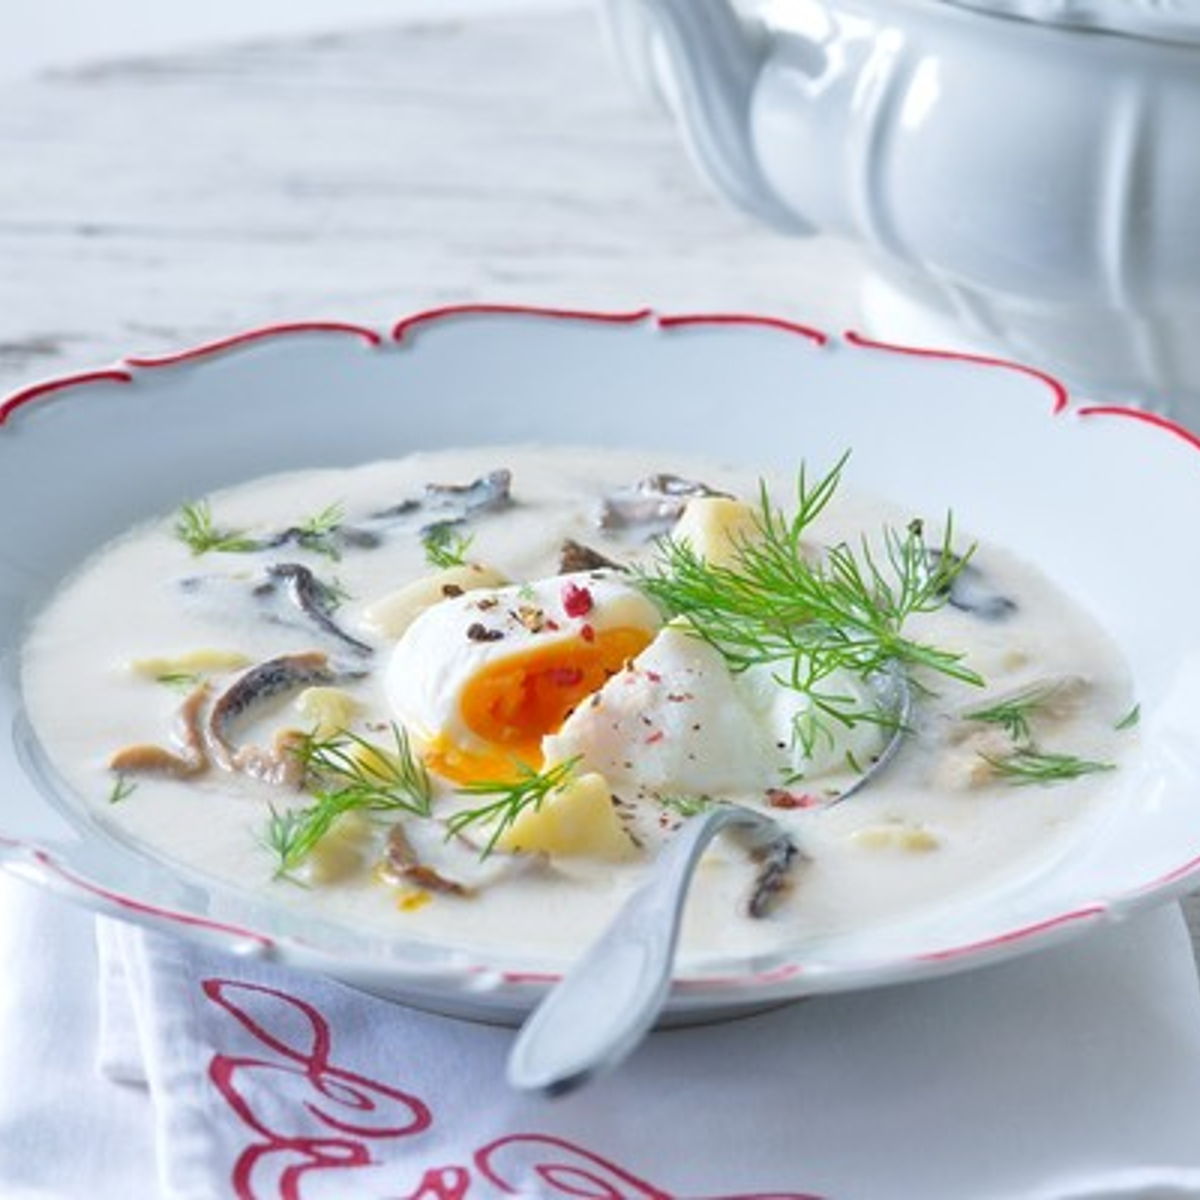 Taste the best Czech soups with homemade bread